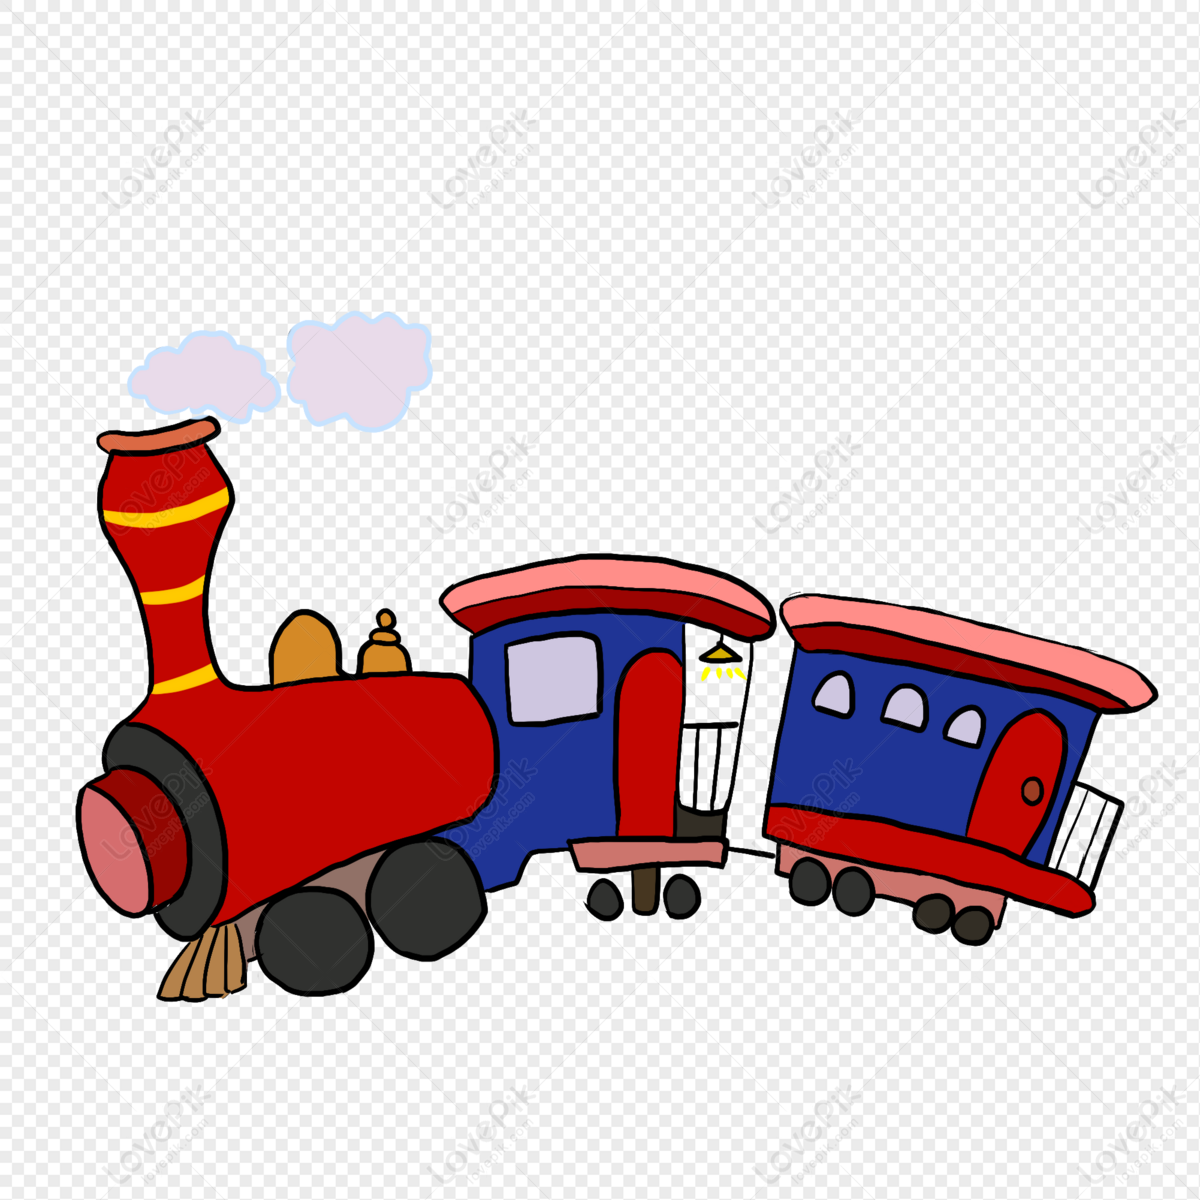 Toy Train PNG Transparent Image And Clipart Image For Free Download -  Lovepik | 401514927